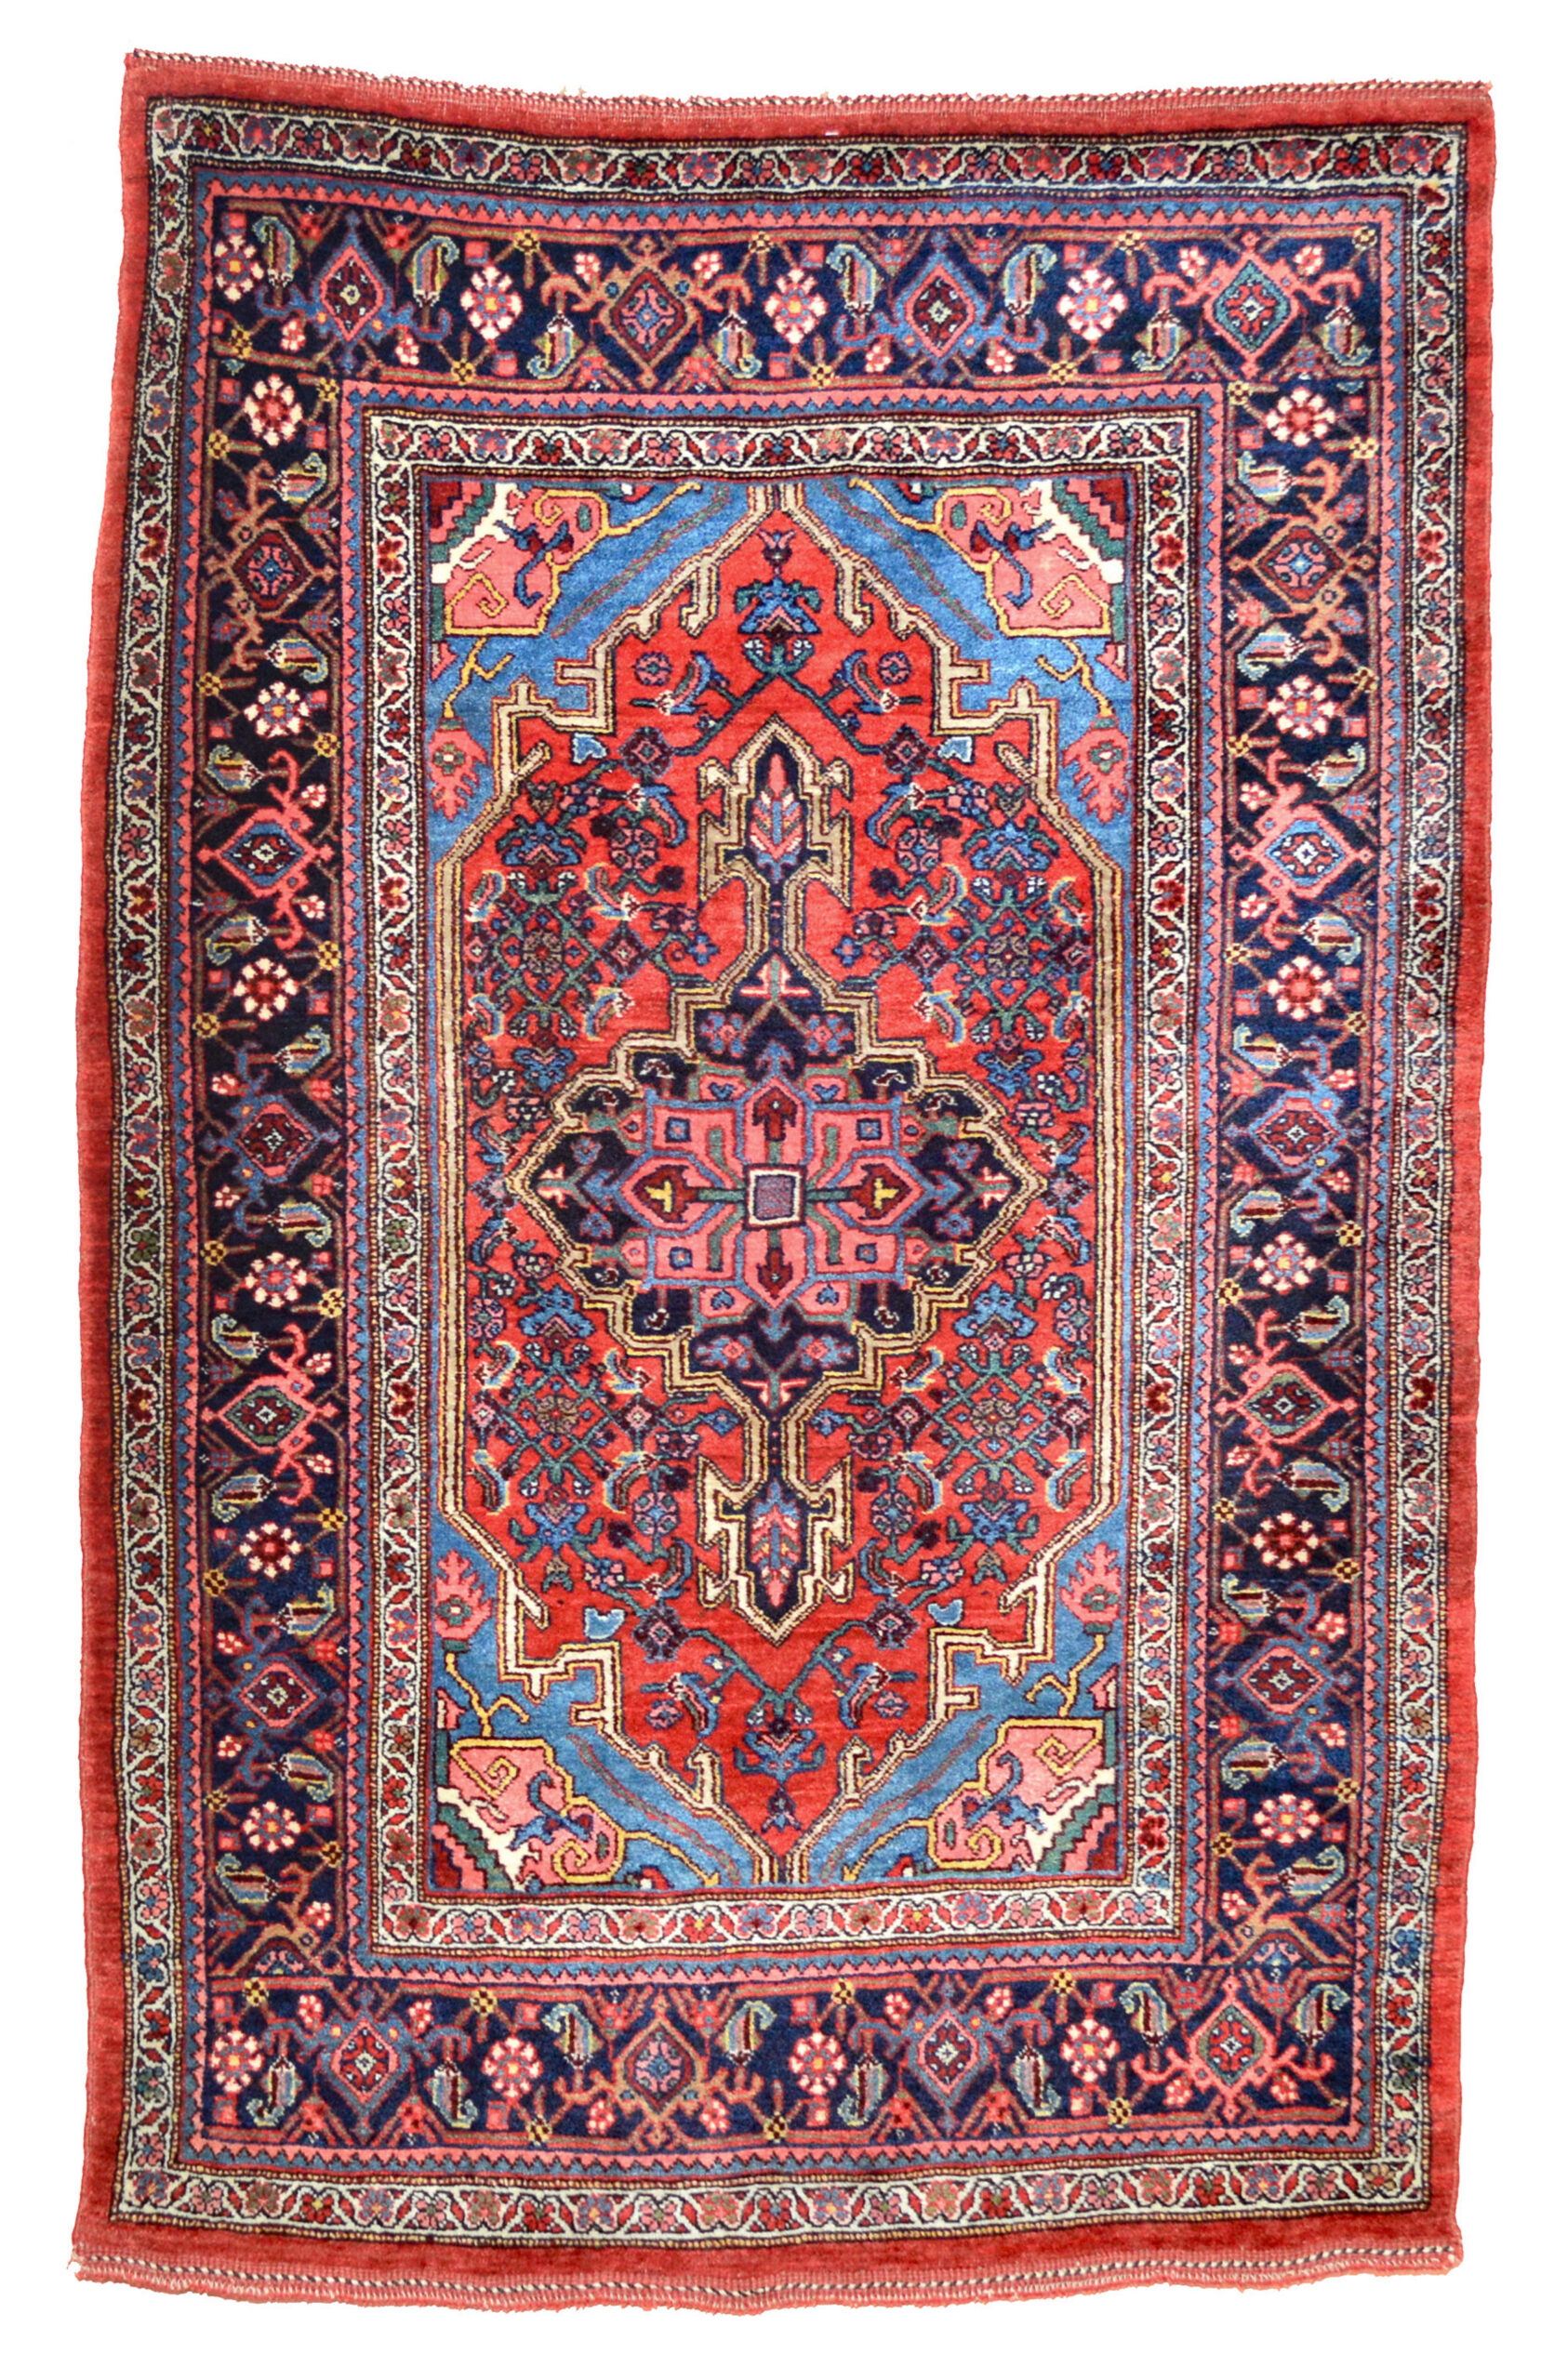 Antique northwest Persian Bidjar rug attributed to the village of Gogargin featuring a red, Herati design field with a navy blue medallion, Douglas Stock Gallery, antique Oriental rugs South Natick,MA, convenient to the Boston Back Bay and Beacon Hill, Brookline, Newton, Wellesley, Weston, Oriental rugs Boston area New England